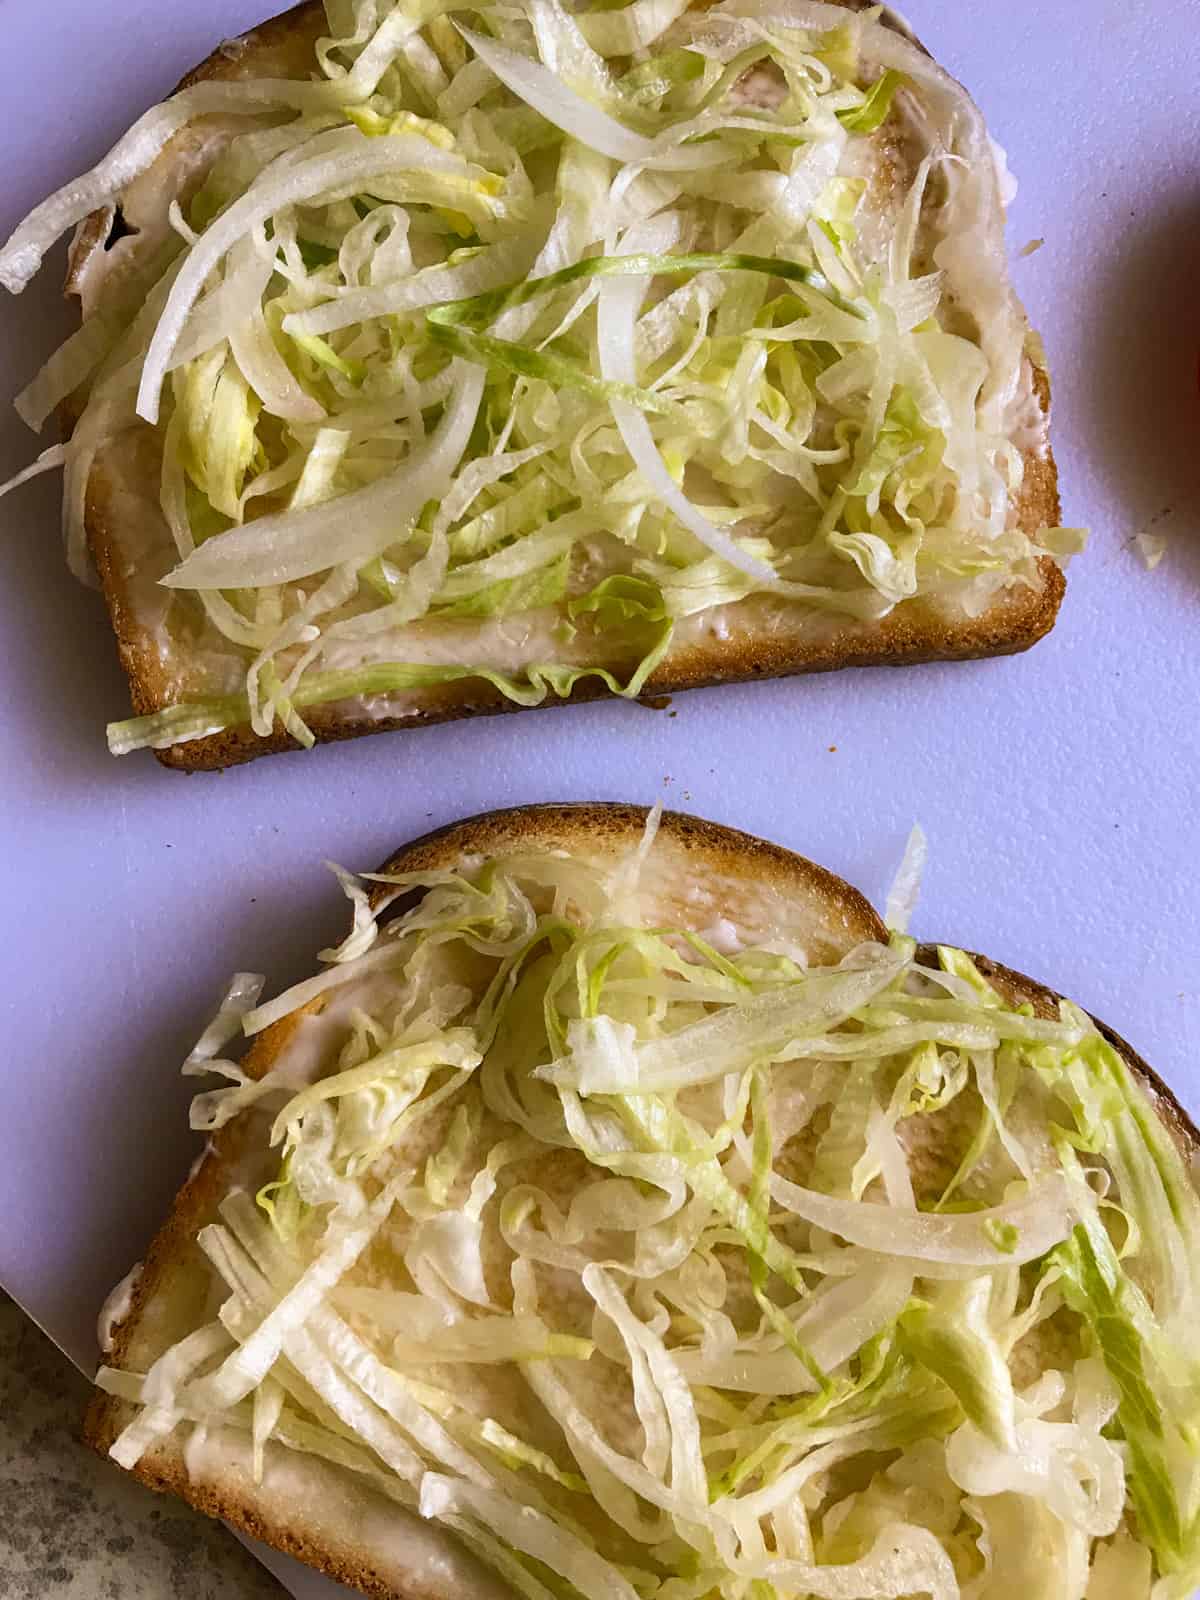 Shredded lettuce and onion on bread.